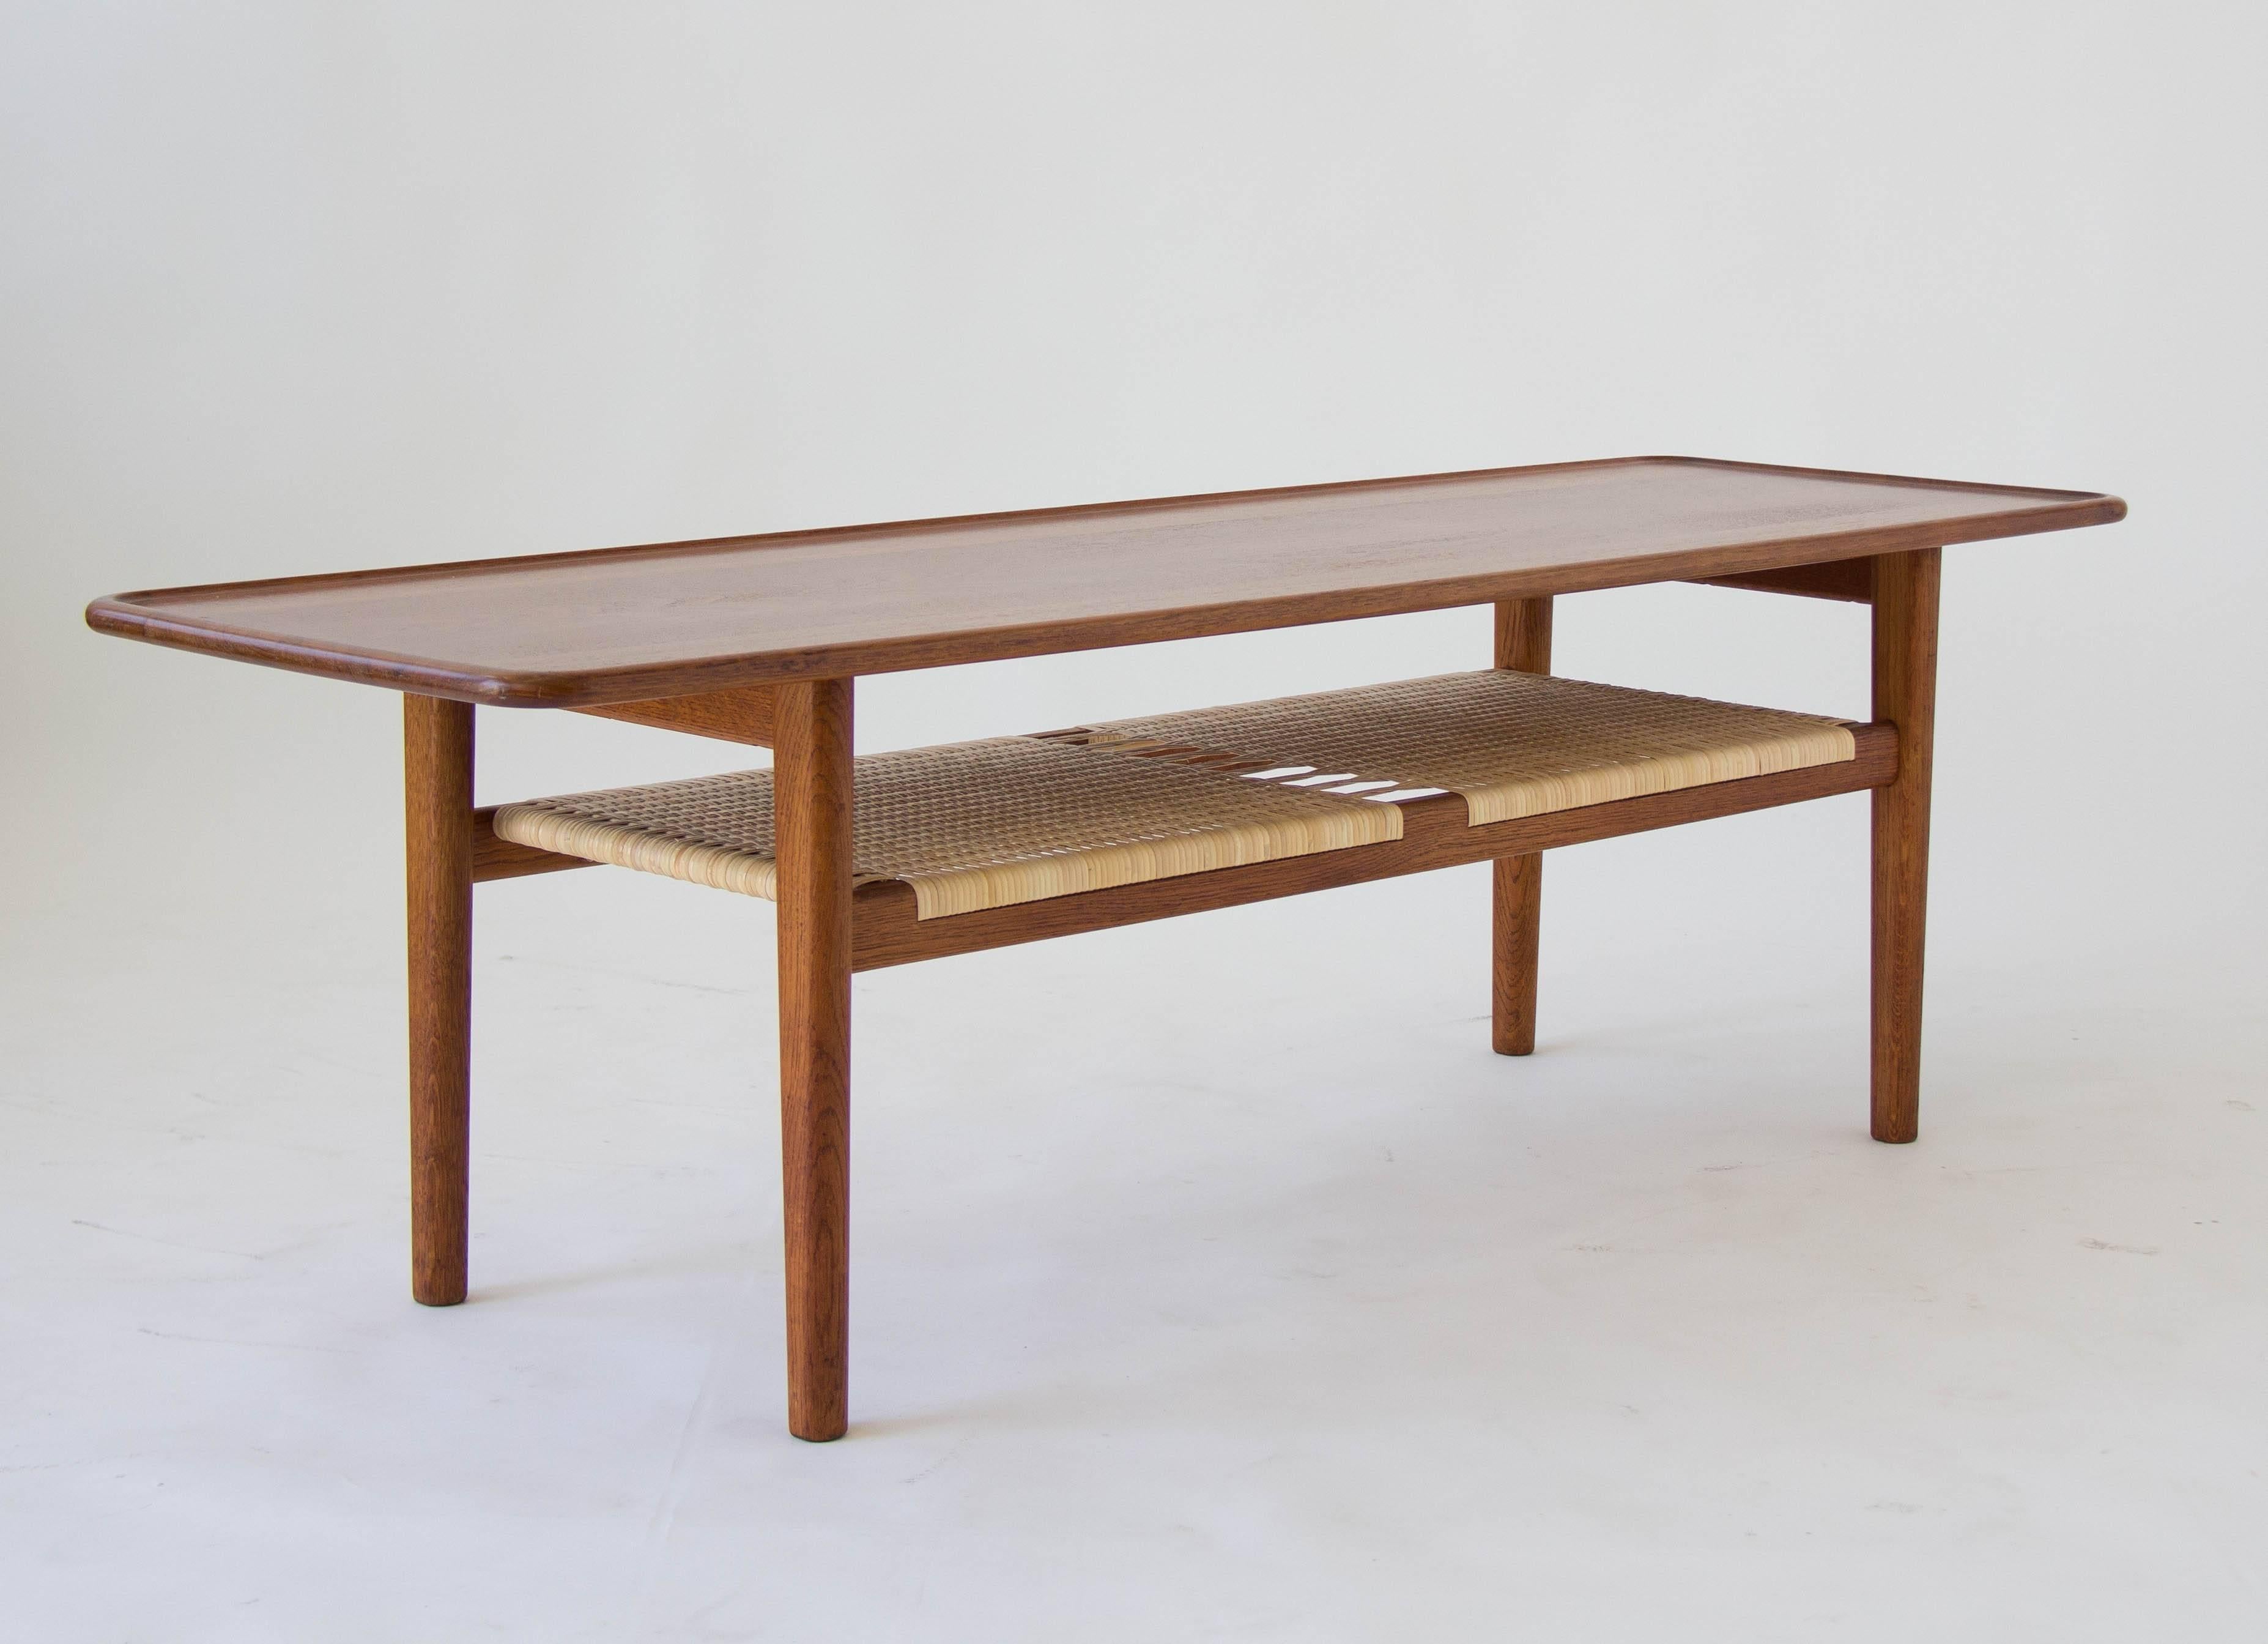 Gorgeous, unusually high coffee table designed by Hans Wegner for Andreas Tuck in 1955. A broad tabletop with a rounded and raised edge is crafted in solid teak and sits atop an oak base. The magazine shelf underneath is covered with woven cane.